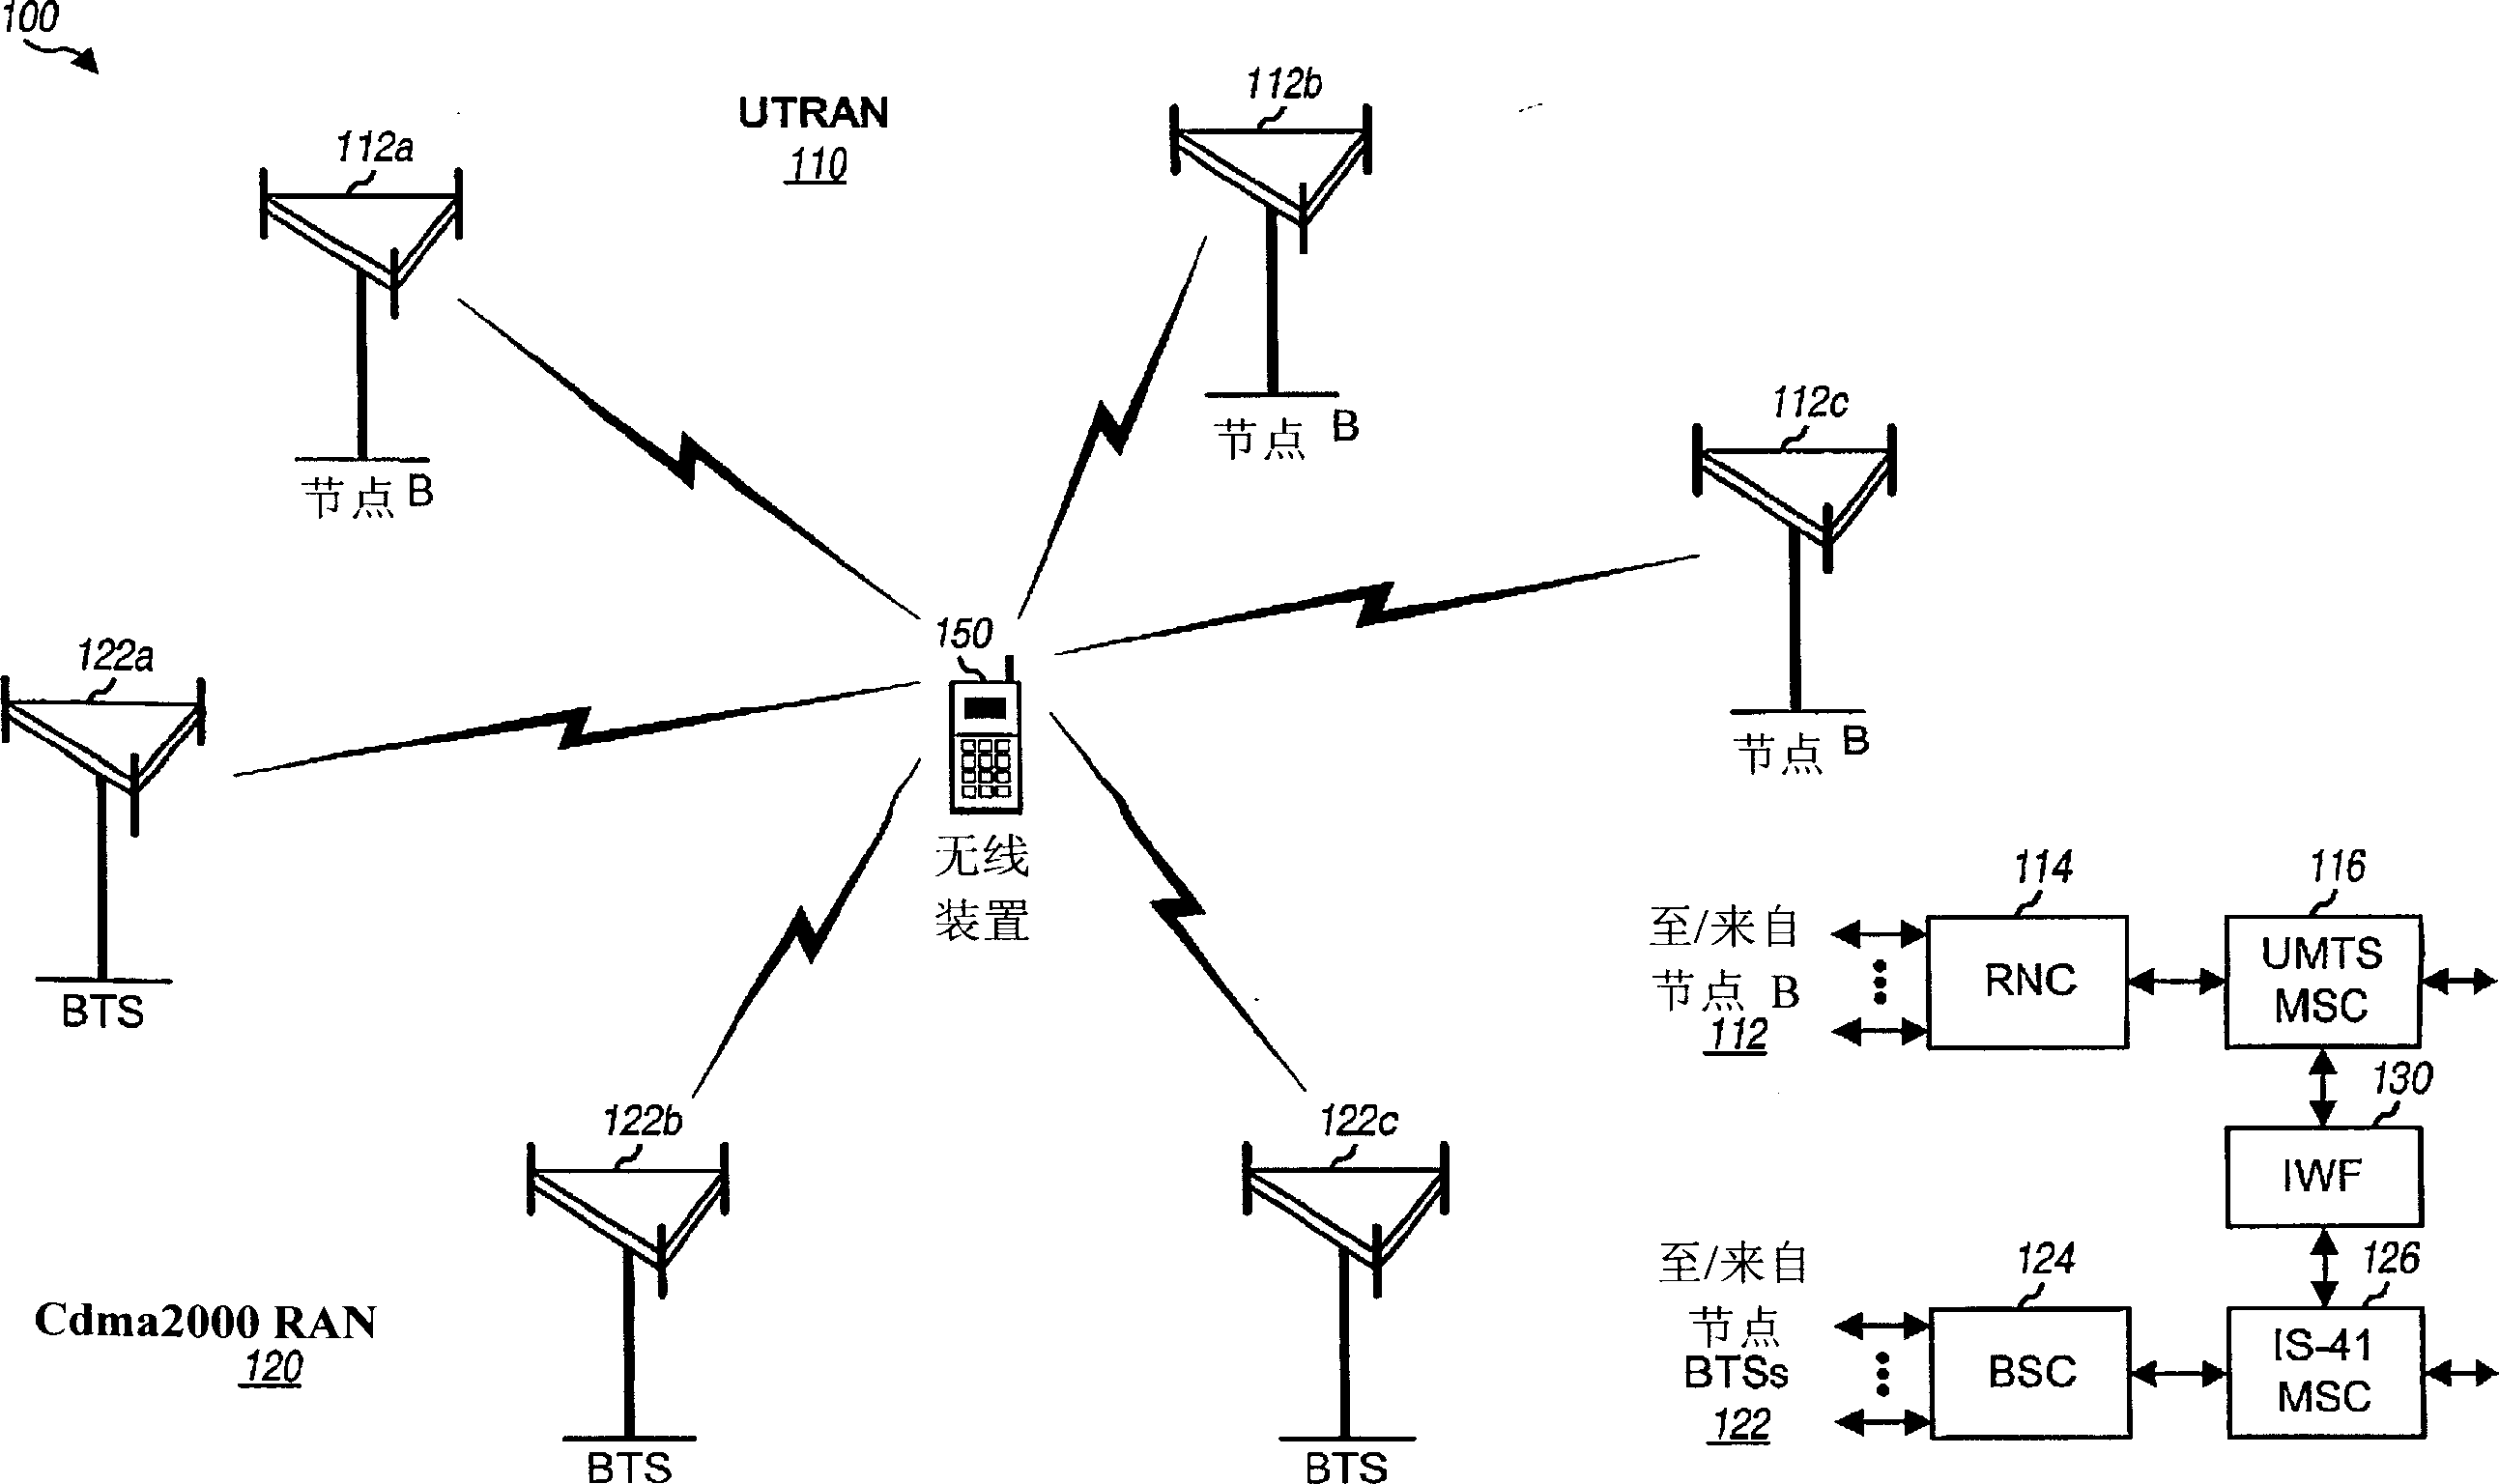 Inter-system handoff between wireless communication networks of different radio access technologies